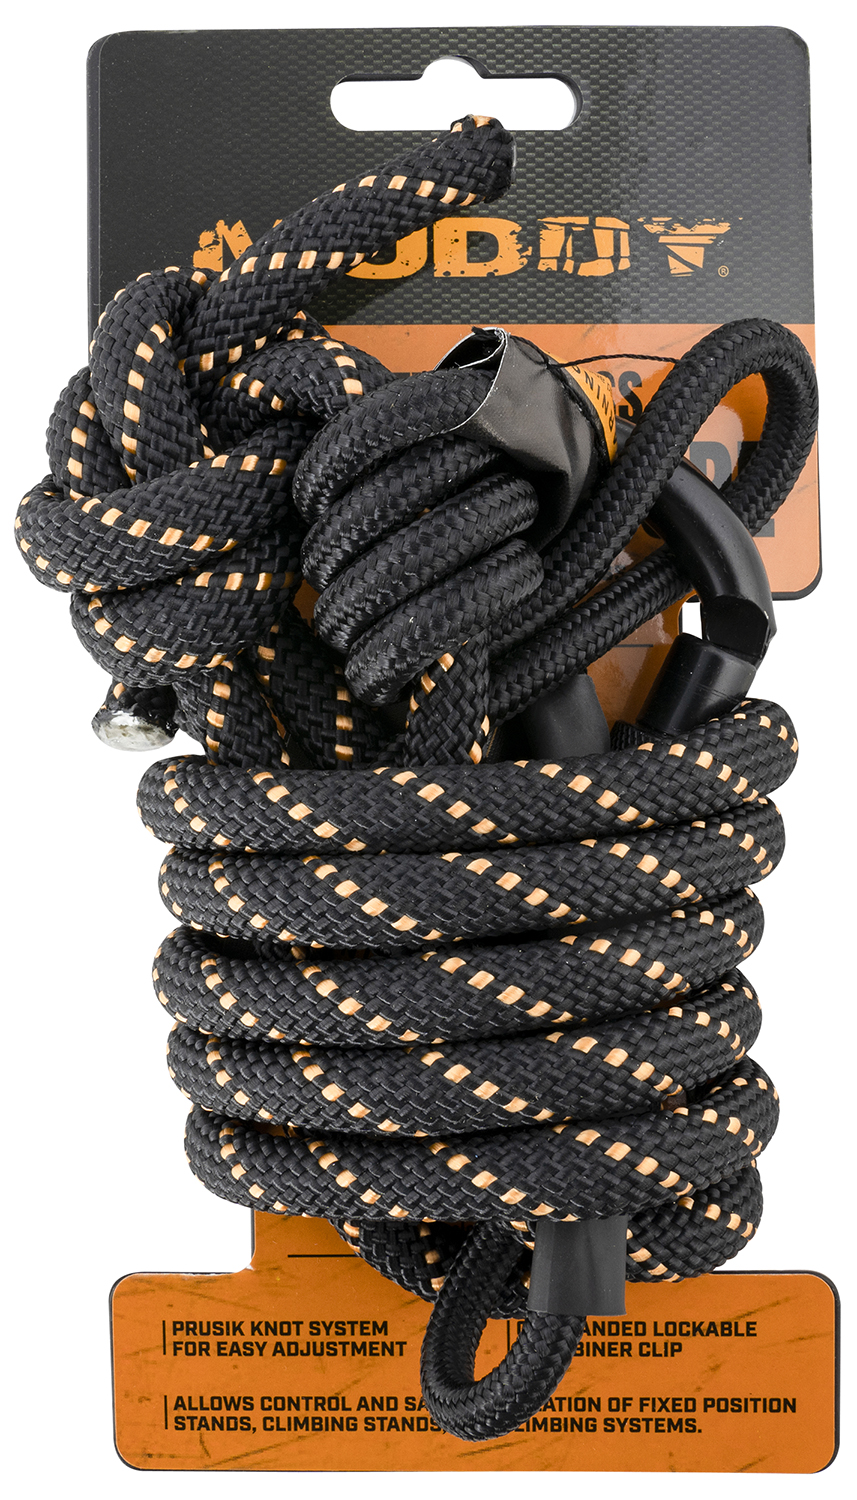 MUDDY SAFETY HARNESS LINEMAN'S ROPE W/CARABINER & PRUSIK KNOT